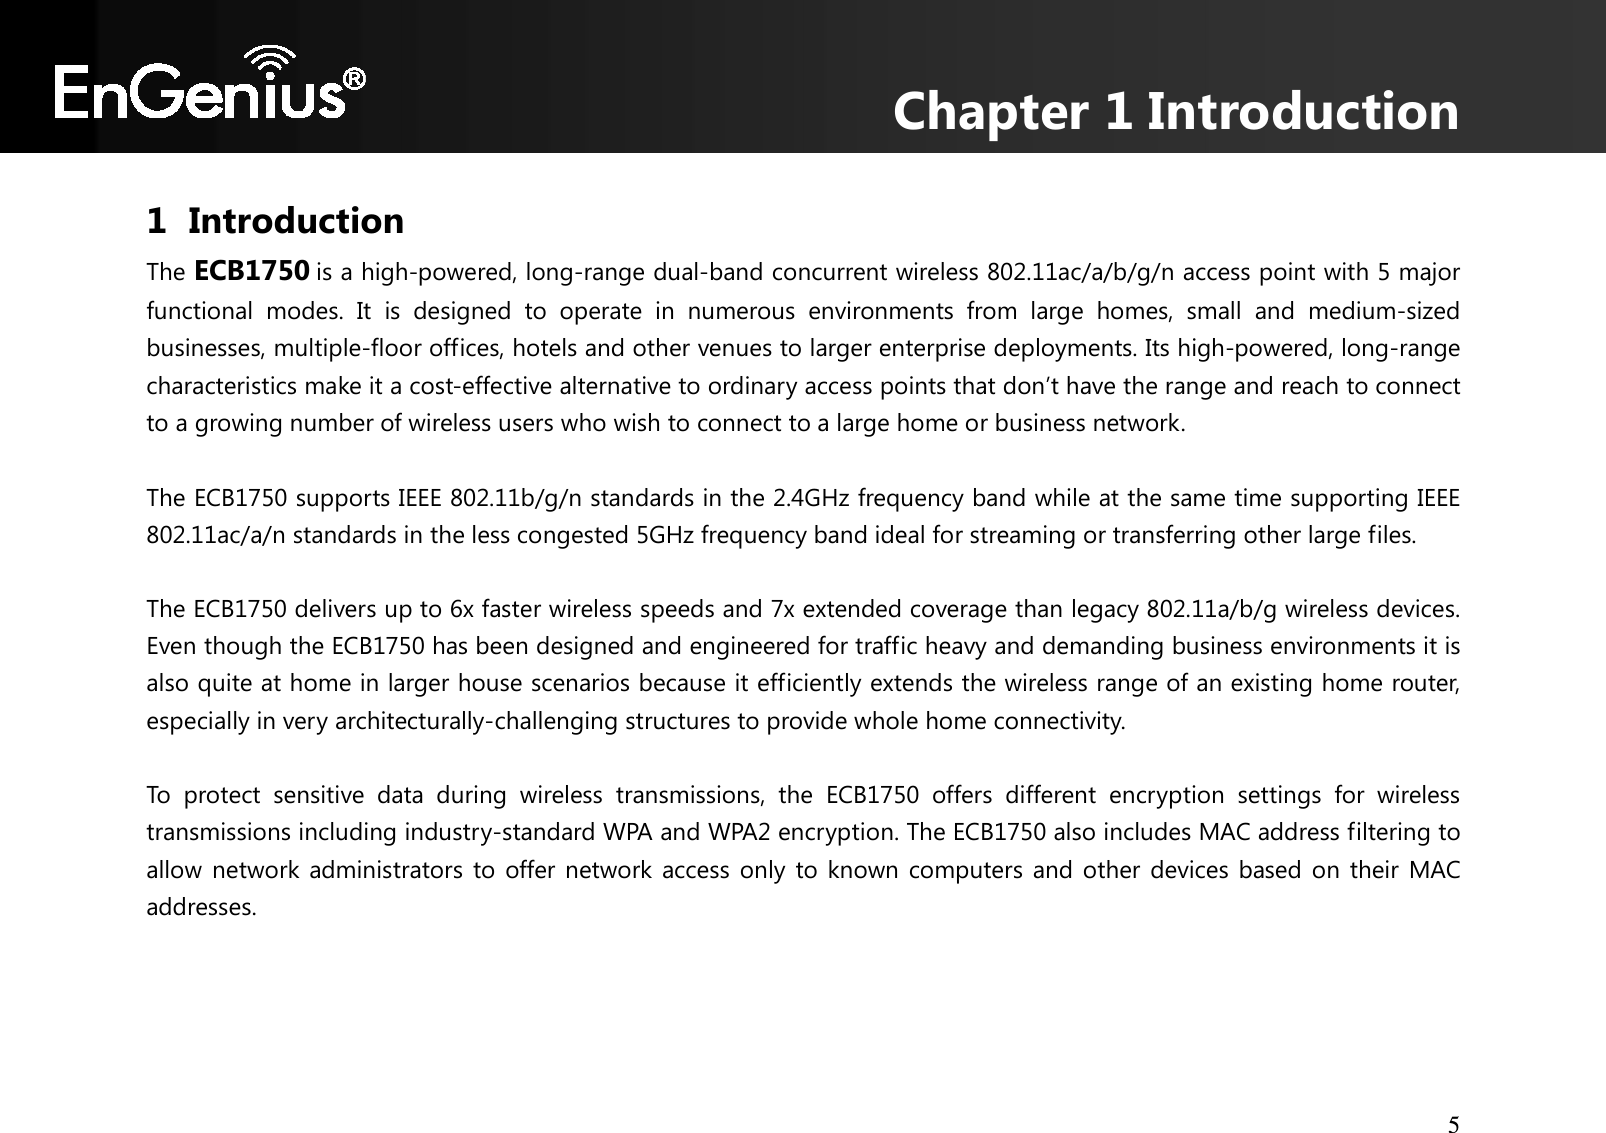 Chapter 1 Introduction 5  1 Introduction The ECB1750 is a high-powered, long-range dual-band concurrent wireless 802.11ac/a/b/g/n access point with 5 major functional  modes.  It  is  designed  to  operate  in  numerous  environments  from  large  homes,  small  and  medium-sized businesses, multiple-floor offices, hotels and other venues to larger enterprise deployments. Its high-powered, long-range characteristics make it a cost-effective alternative to ordinary access points that don’t have the range and reach to connect to a growing number of wireless users who wish to connect to a large home or business network.  The ECB1750 supports IEEE 802.11b/g/n standards in the 2.4GHz frequency band while at the same time supporting IEEE 802.11ac/a/n standards in the less congested 5GHz frequency band ideal for streaming or transferring other large files.  The ECB1750 delivers up to 6x faster wireless speeds and 7x extended coverage than legacy 802.11a/b/g wireless devices. Even though the ECB1750 has been designed and engineered for traffic heavy and demanding business environments it is also quite at home in larger house scenarios because it efficiently extends the wireless range of an existing home router, especially in very architecturally-challenging structures to provide whole home connectivity.  To  protect  sensitive  data  during  wireless  transmissions,  the  ECB1750  offers  different  encryption  settings  for  wireless transmissions including industry-standard WPA and WPA2 encryption. The ECB1750 also includes MAC address filtering to allow network administrators to offer network access only to known computers and other devices  based  on their MAC addresses.   